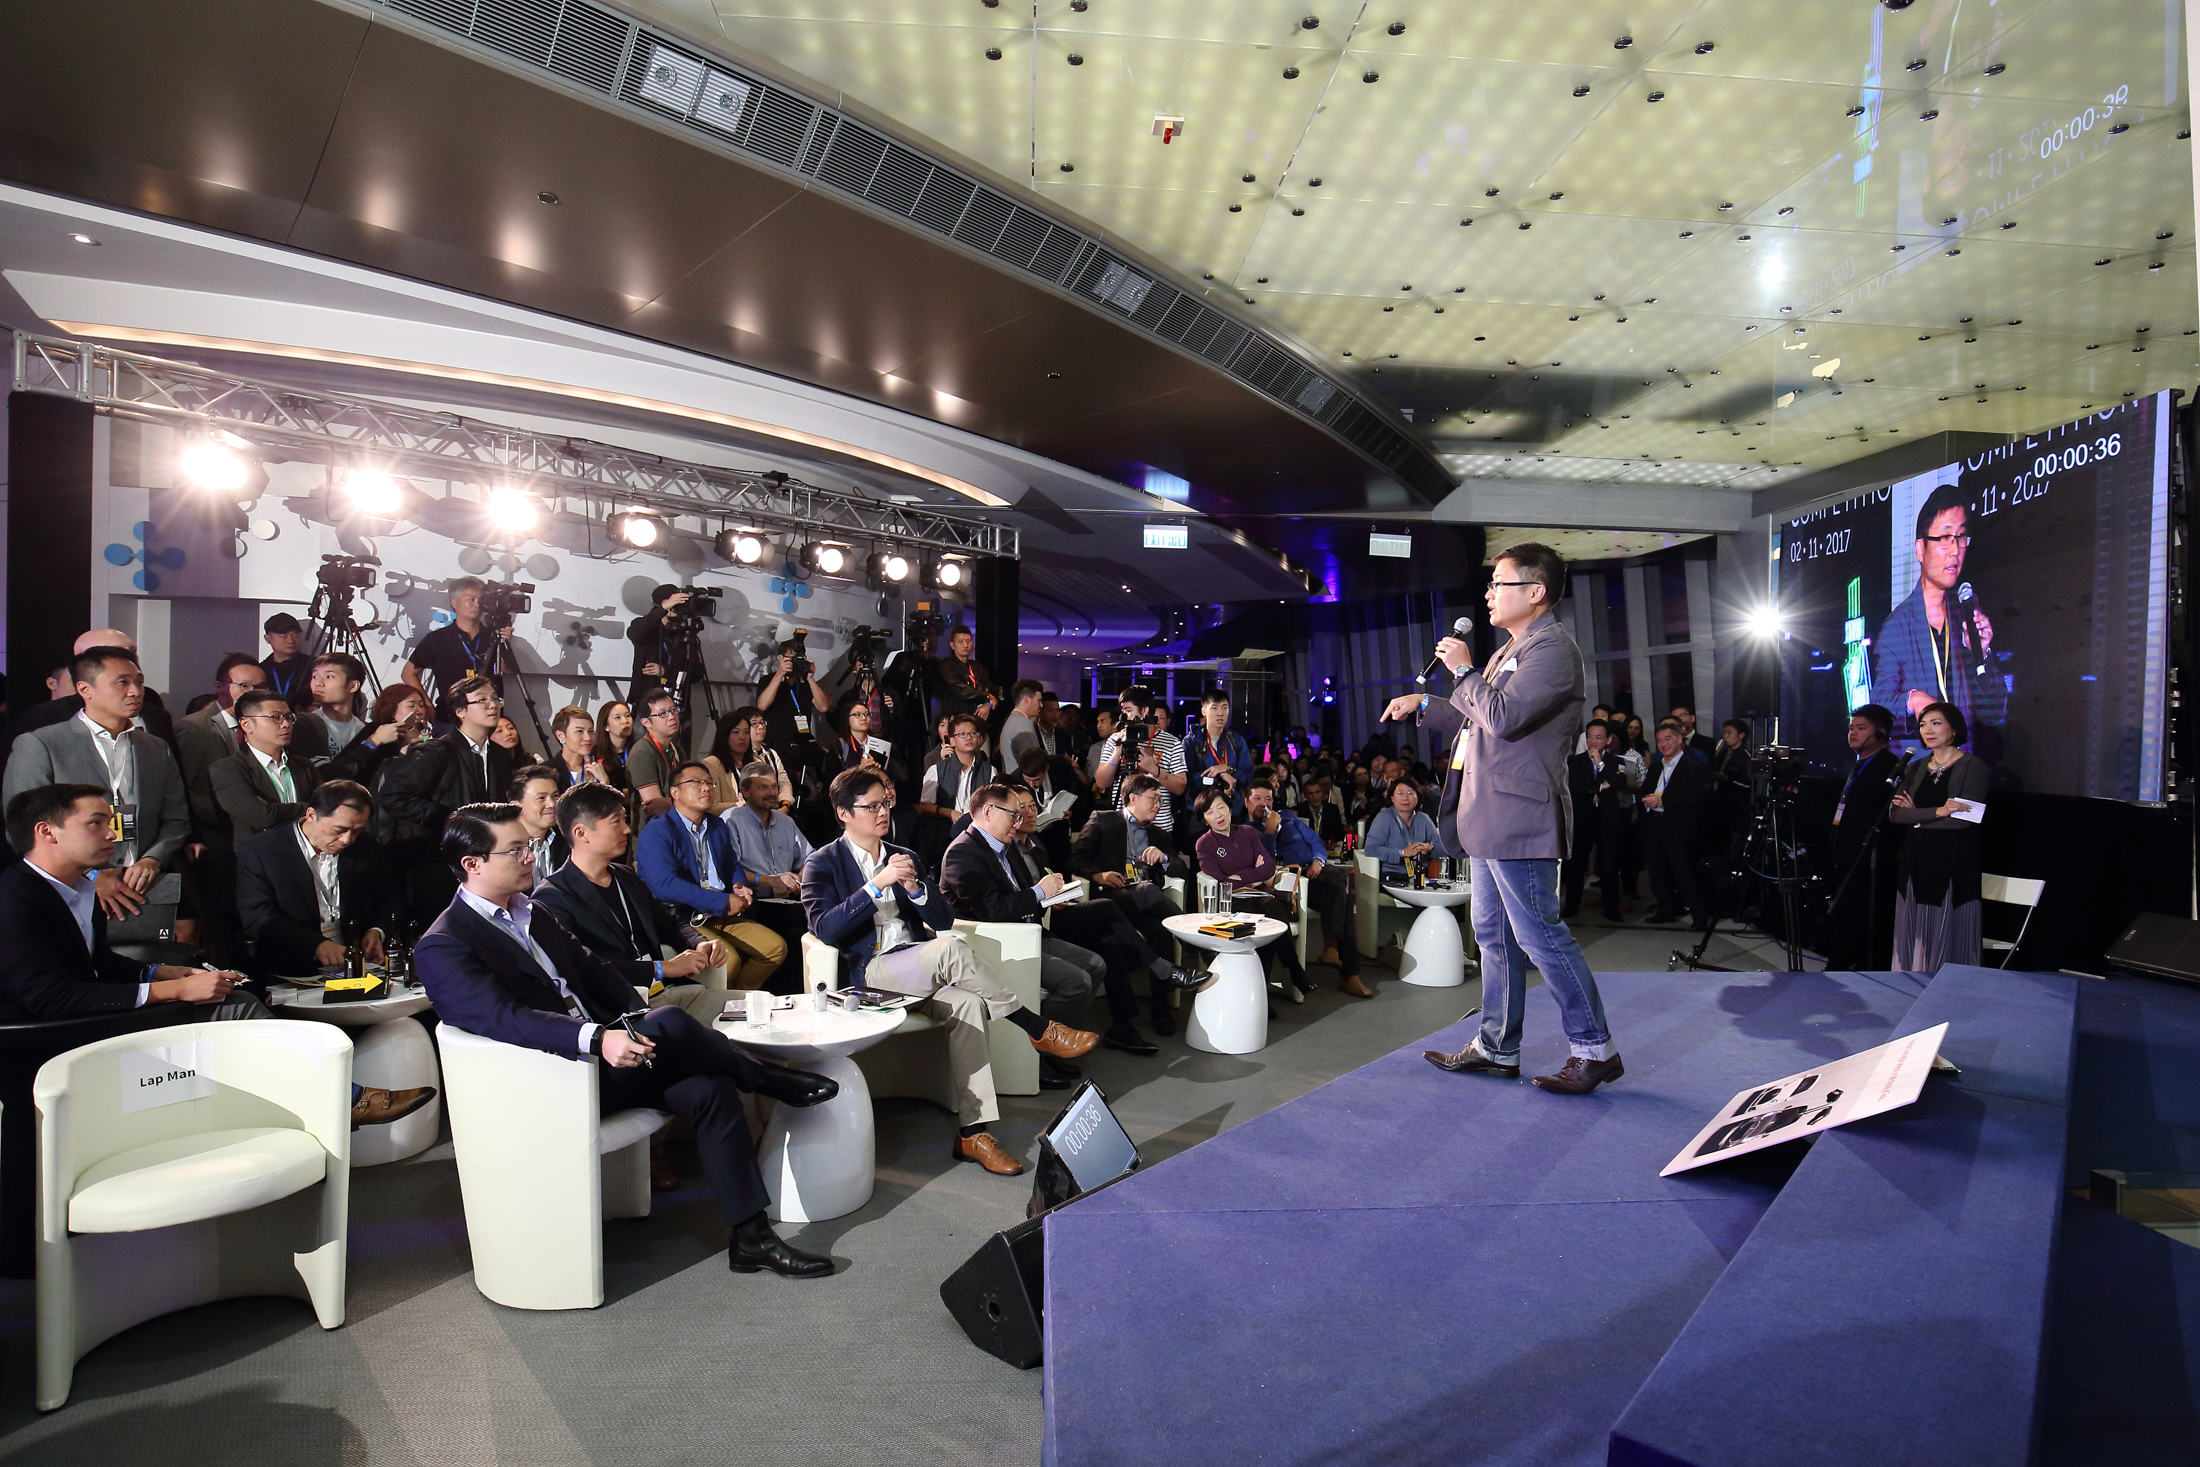 One hundred high potential start-ups from around the world pitch their ideas to investors and industry leaders in EPiC